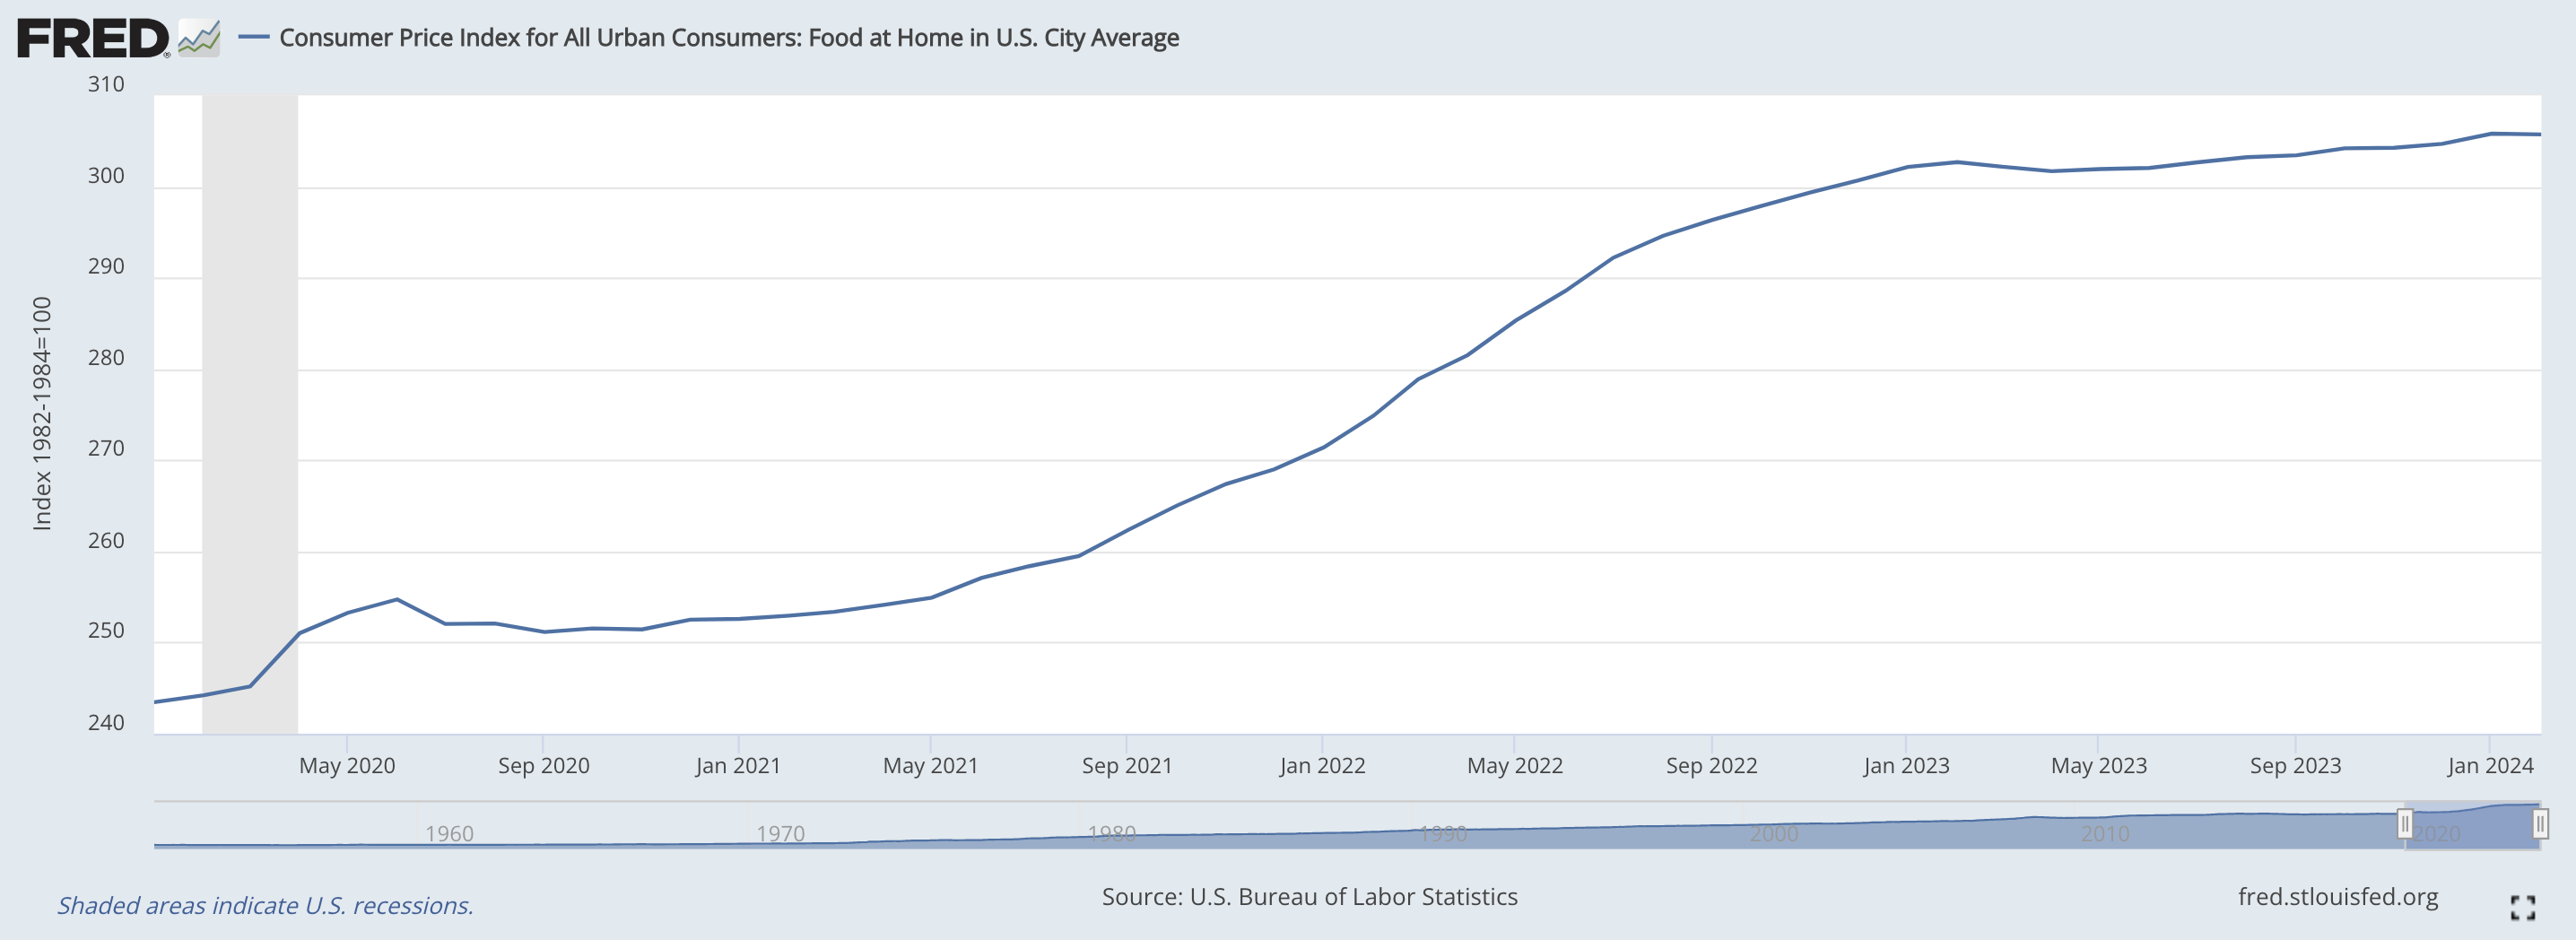 Graph of U.S. Food at Home Consumer Price Index rising from 2020 to 2024